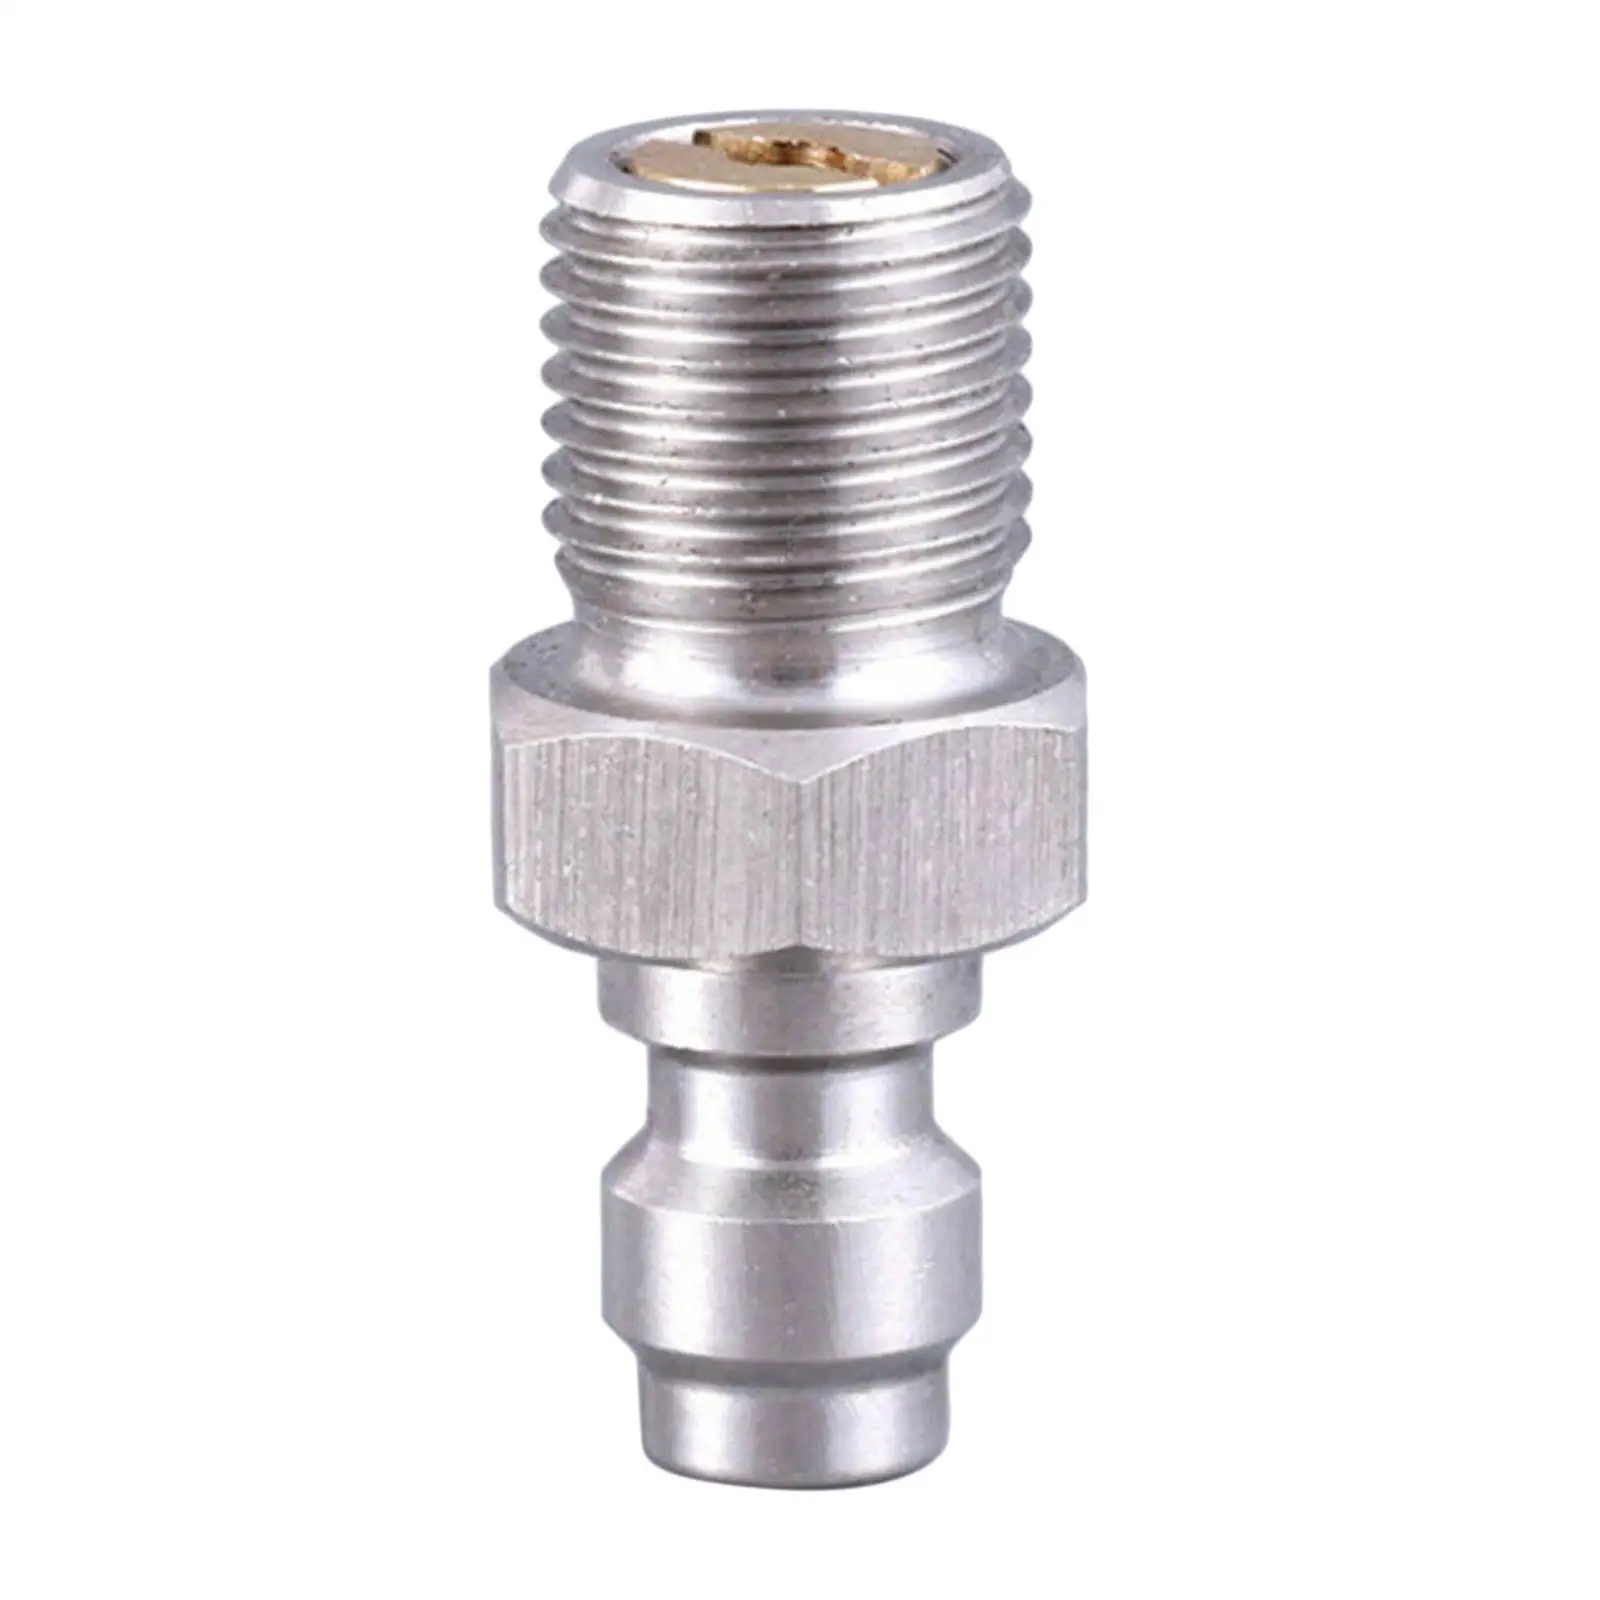 

Pressure Washer Fitting Stainless Steel High Hardness Corrosion Resistant Durable M10 Robust Pressure Washer Coupler for Nozzles